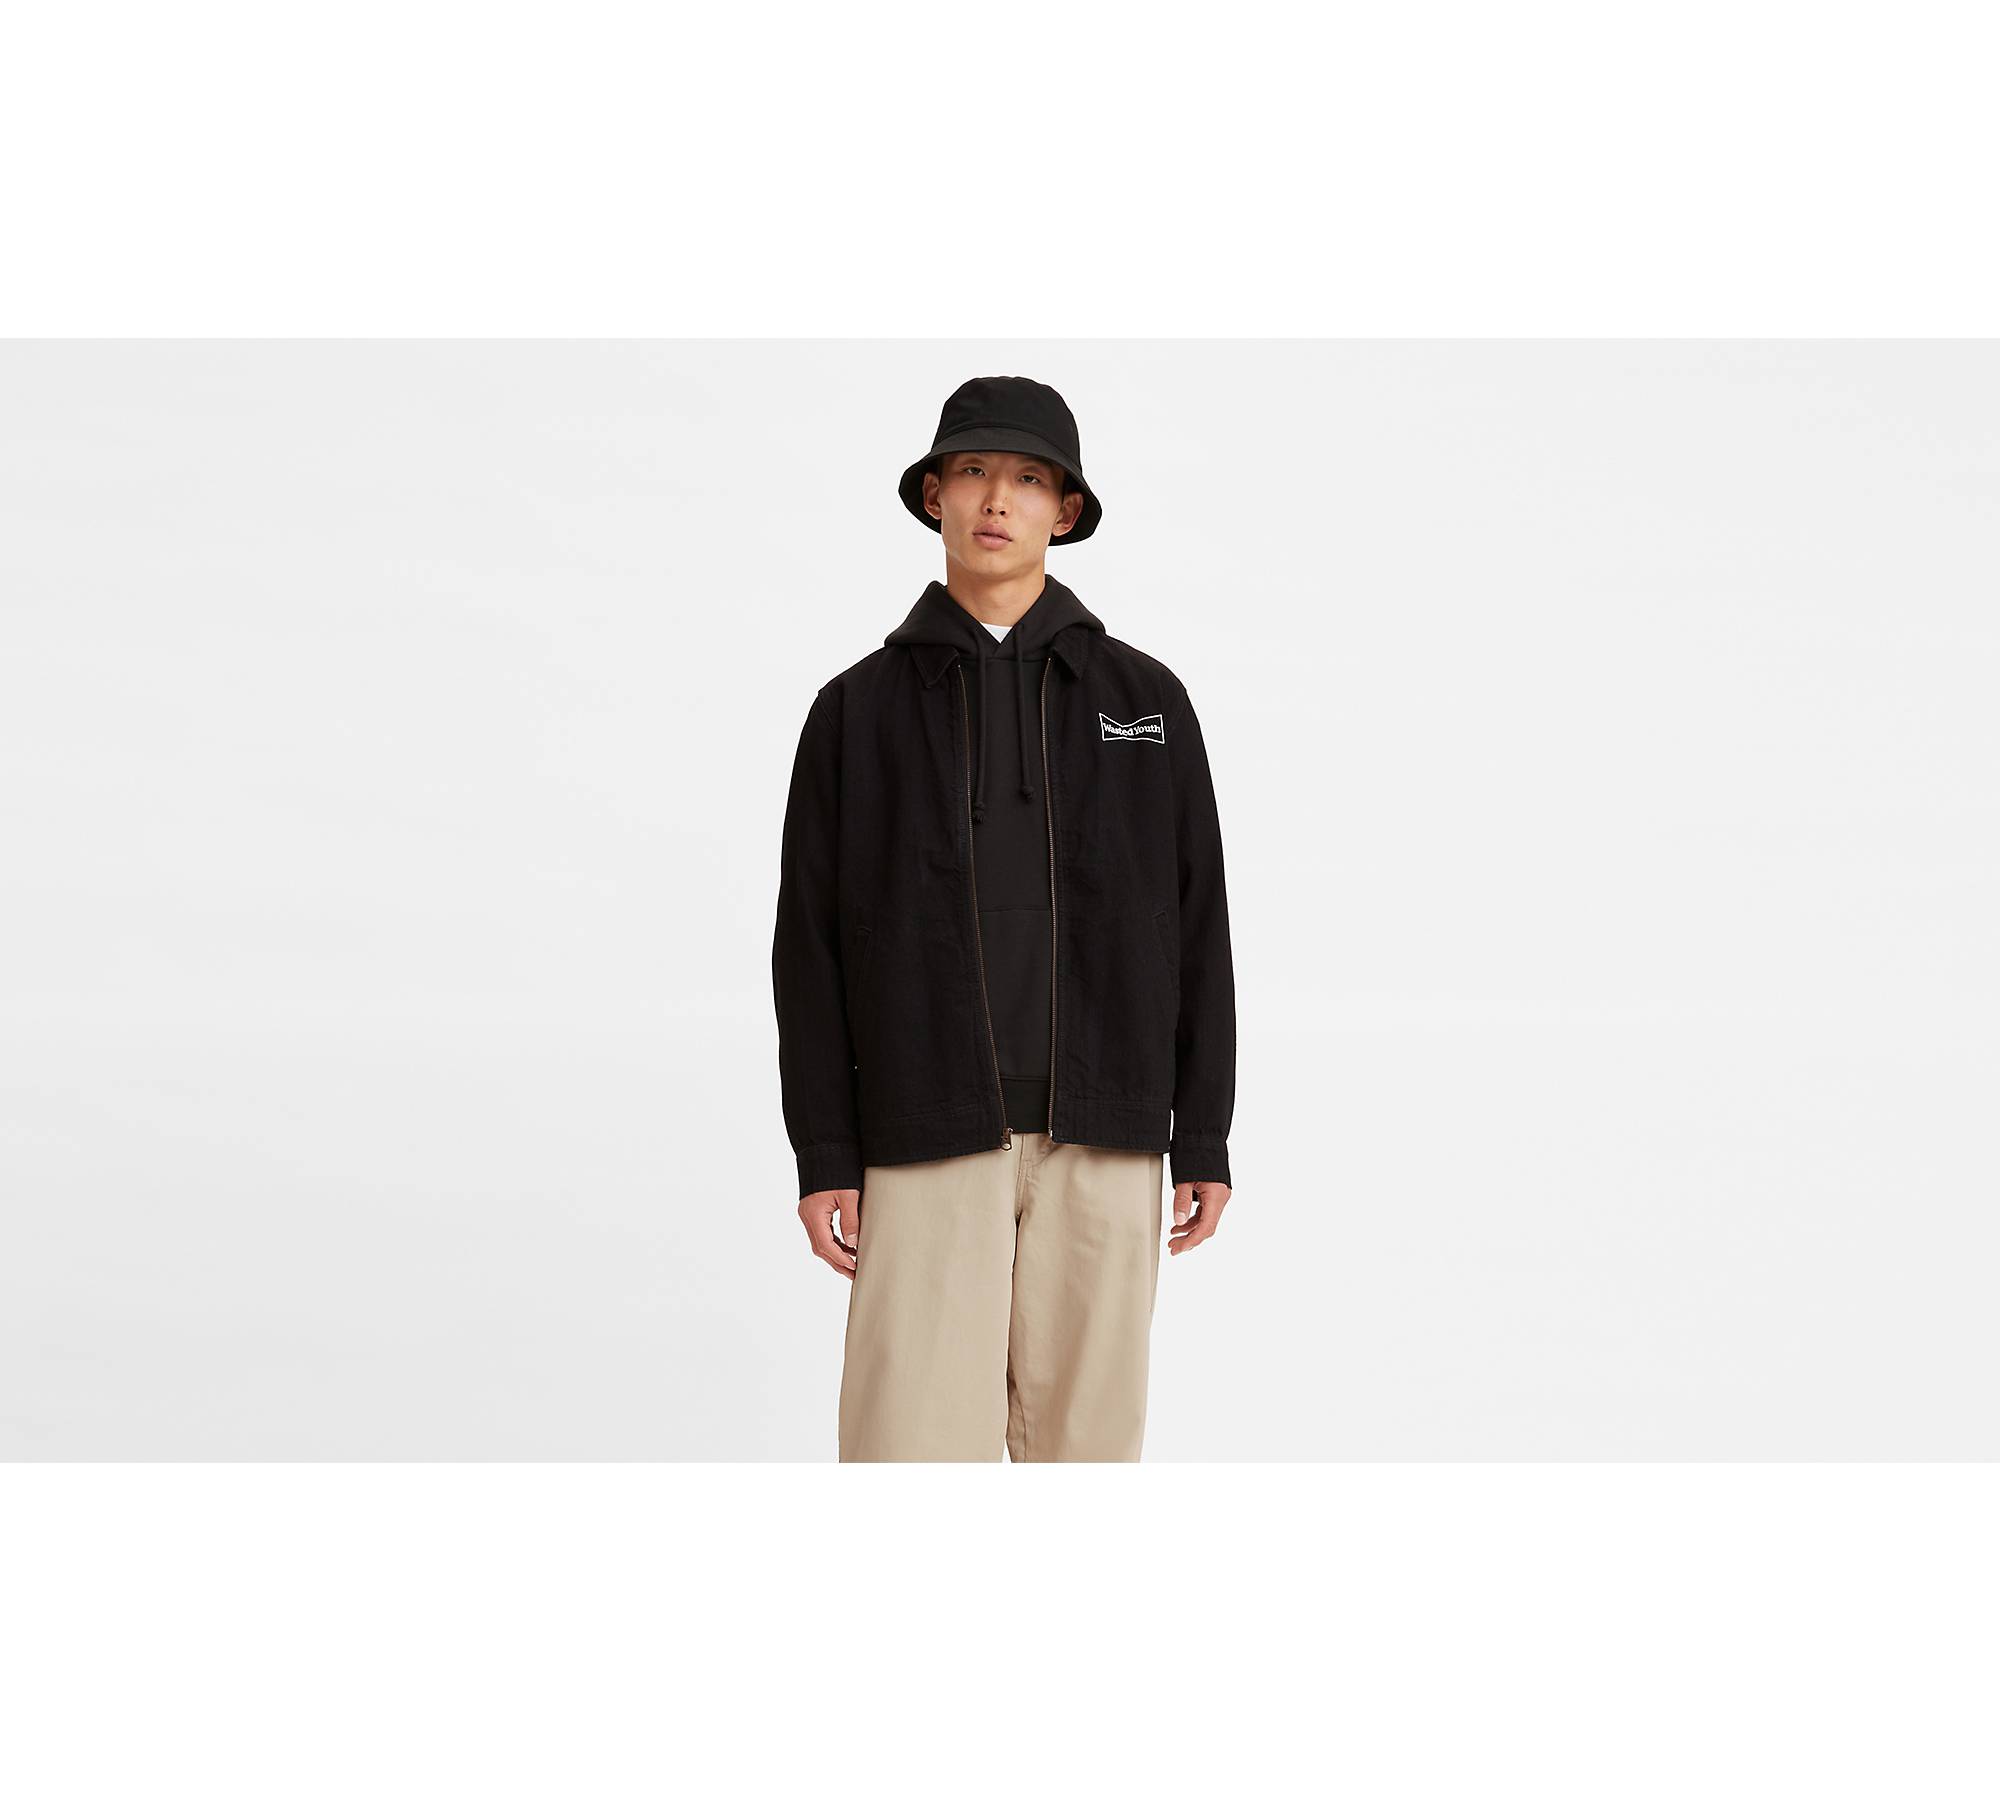 LEVI'S x Wasted Youth Workers Jacket | nate-hospital.com